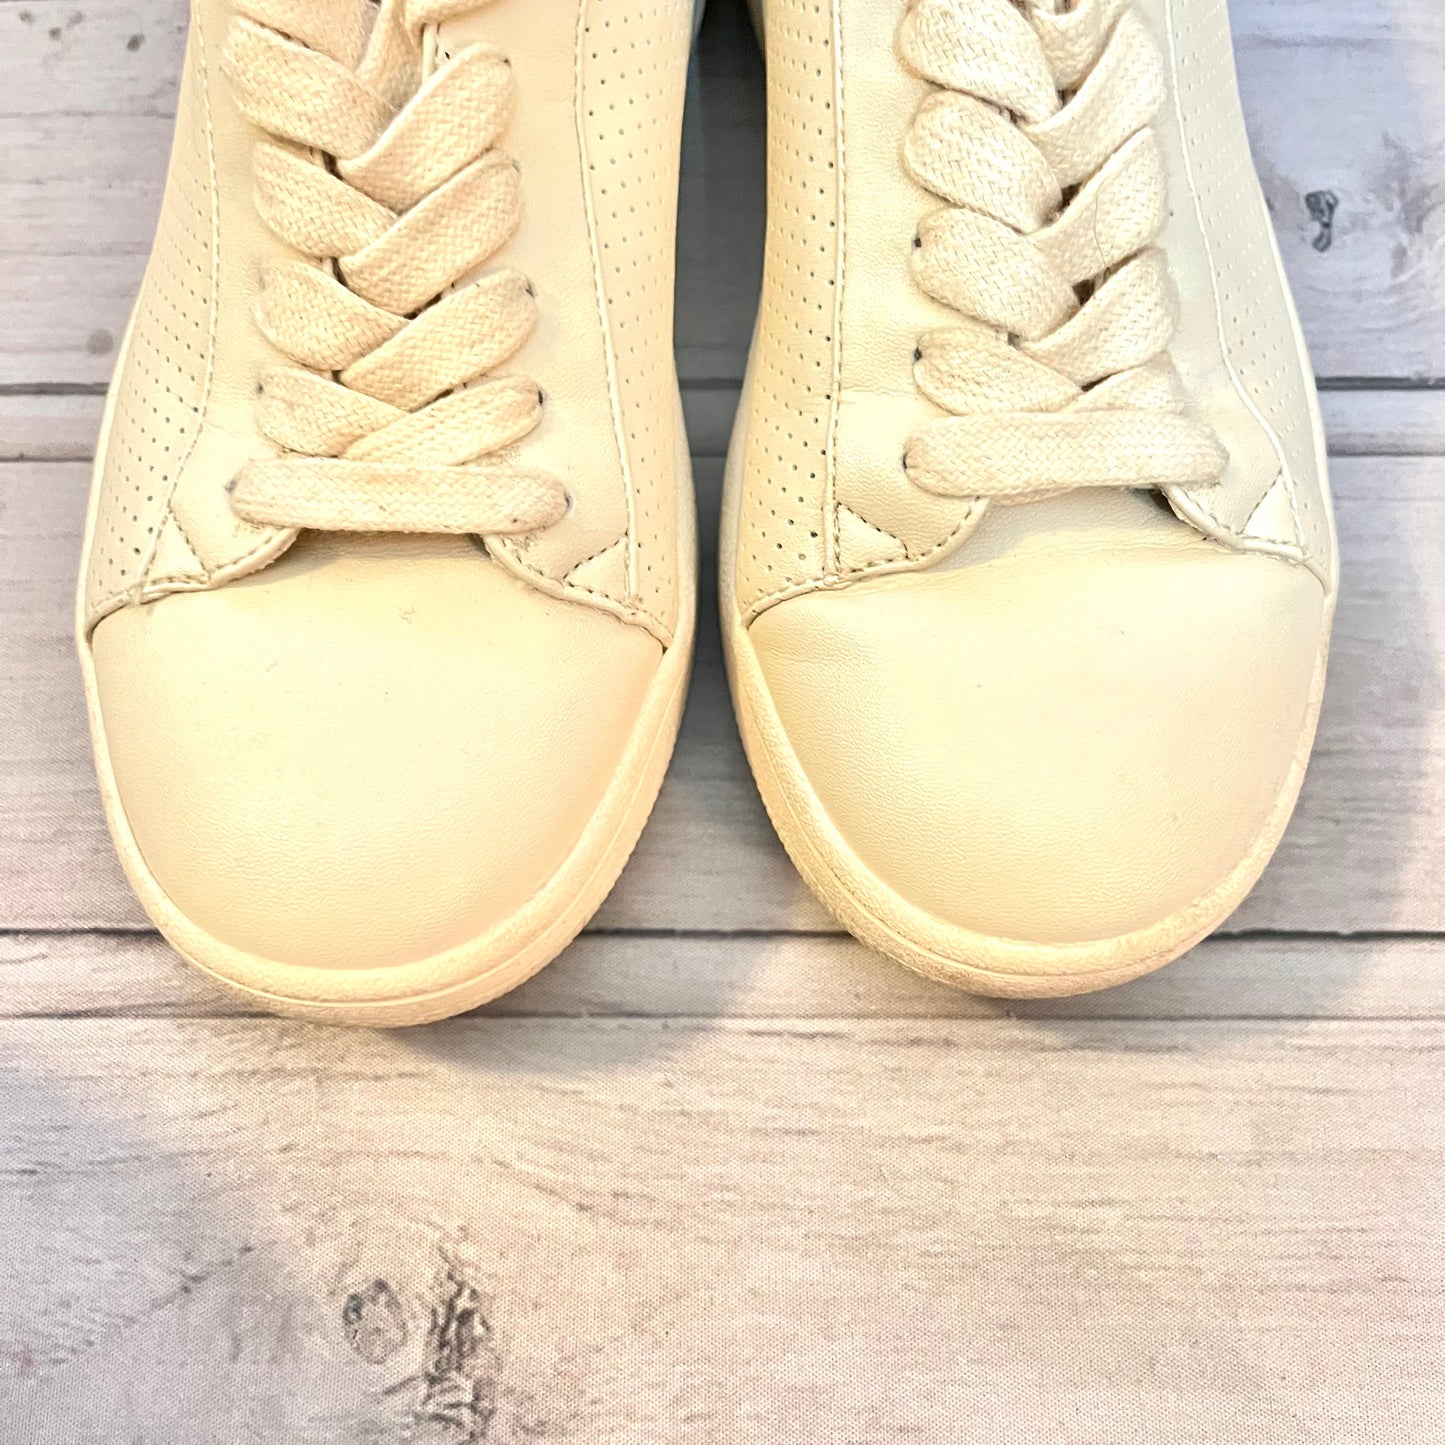 Shoes Sneakers By Steve Madden  Size: 6.5